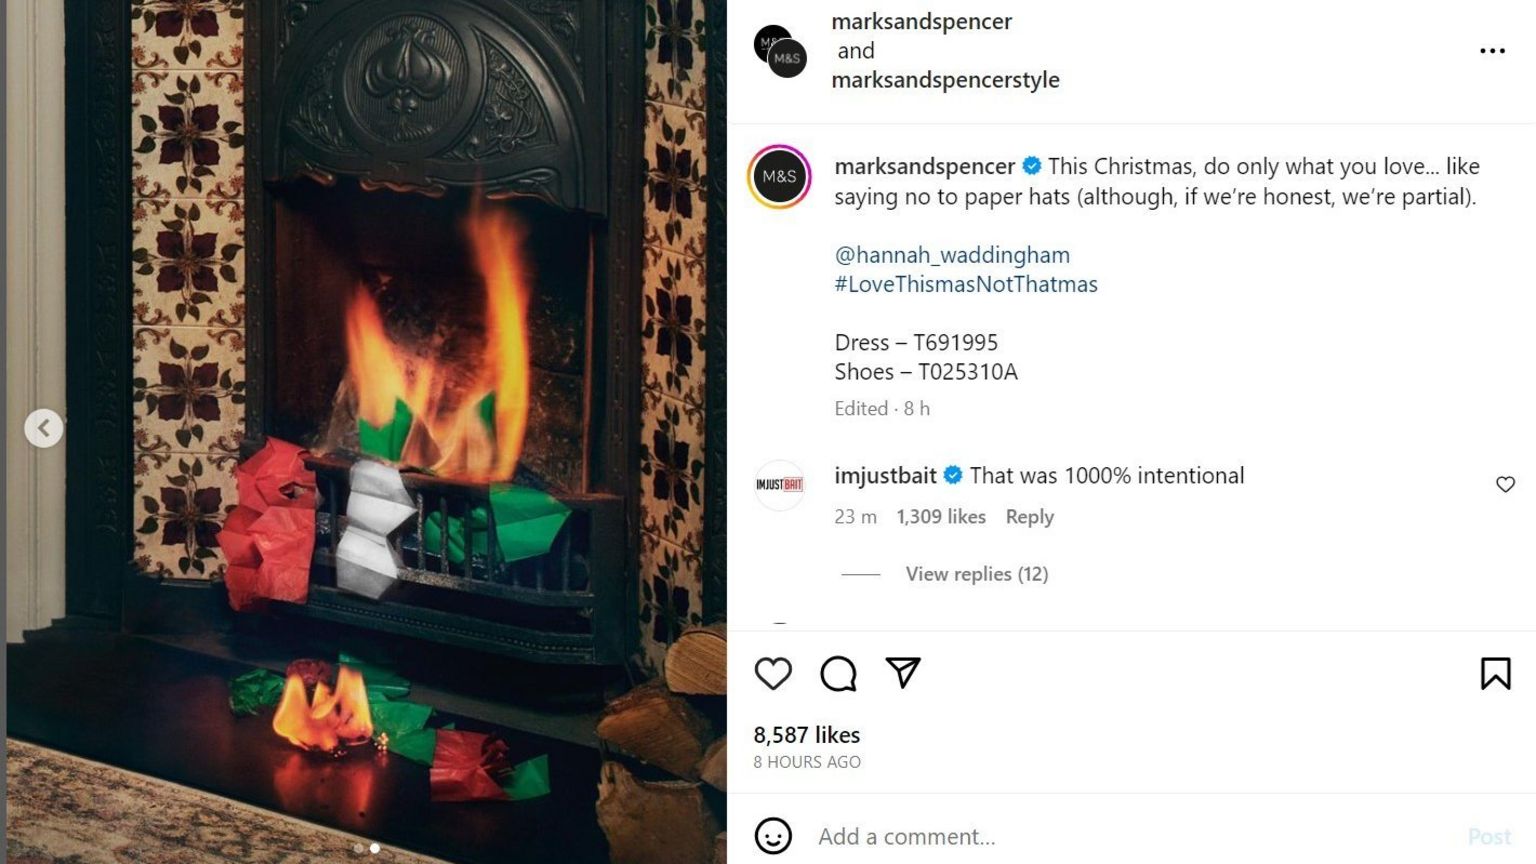 The post deleted by Marks and Spencer after intense criticism showing red, silver and green party hats burning in a fire